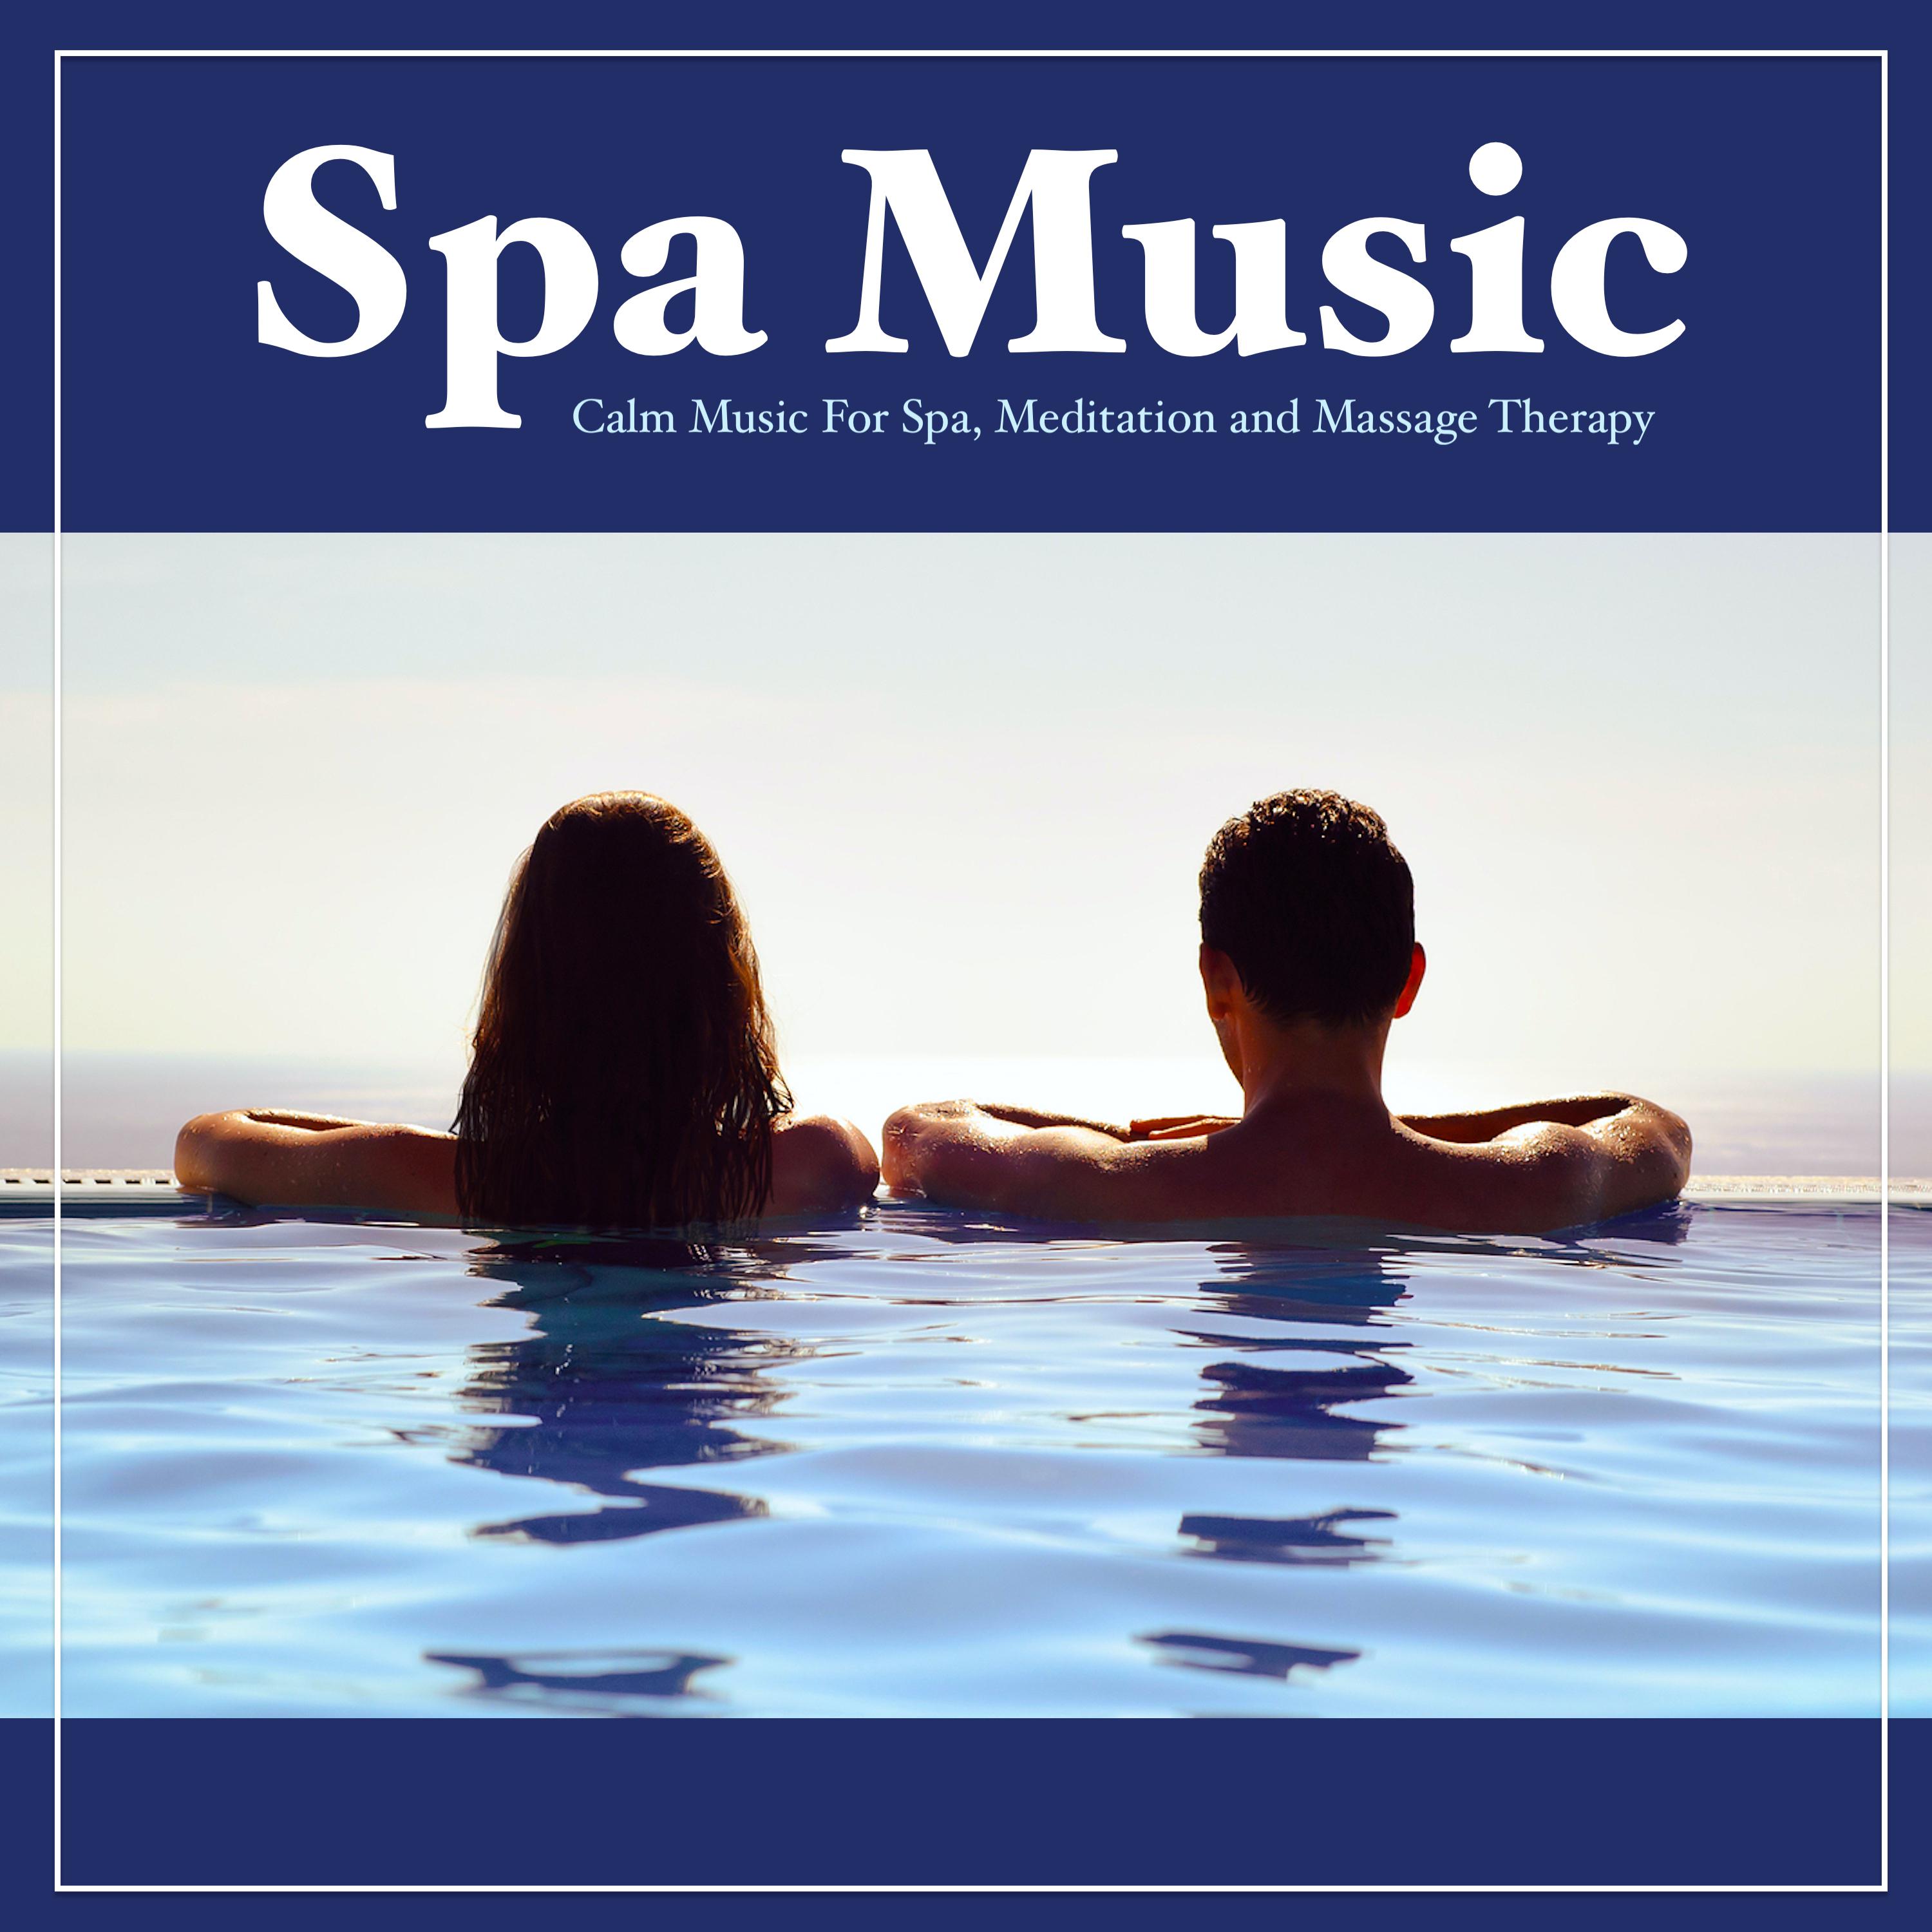 Spa Music: Calm Music For Spa, Meditation and Massage Therapy